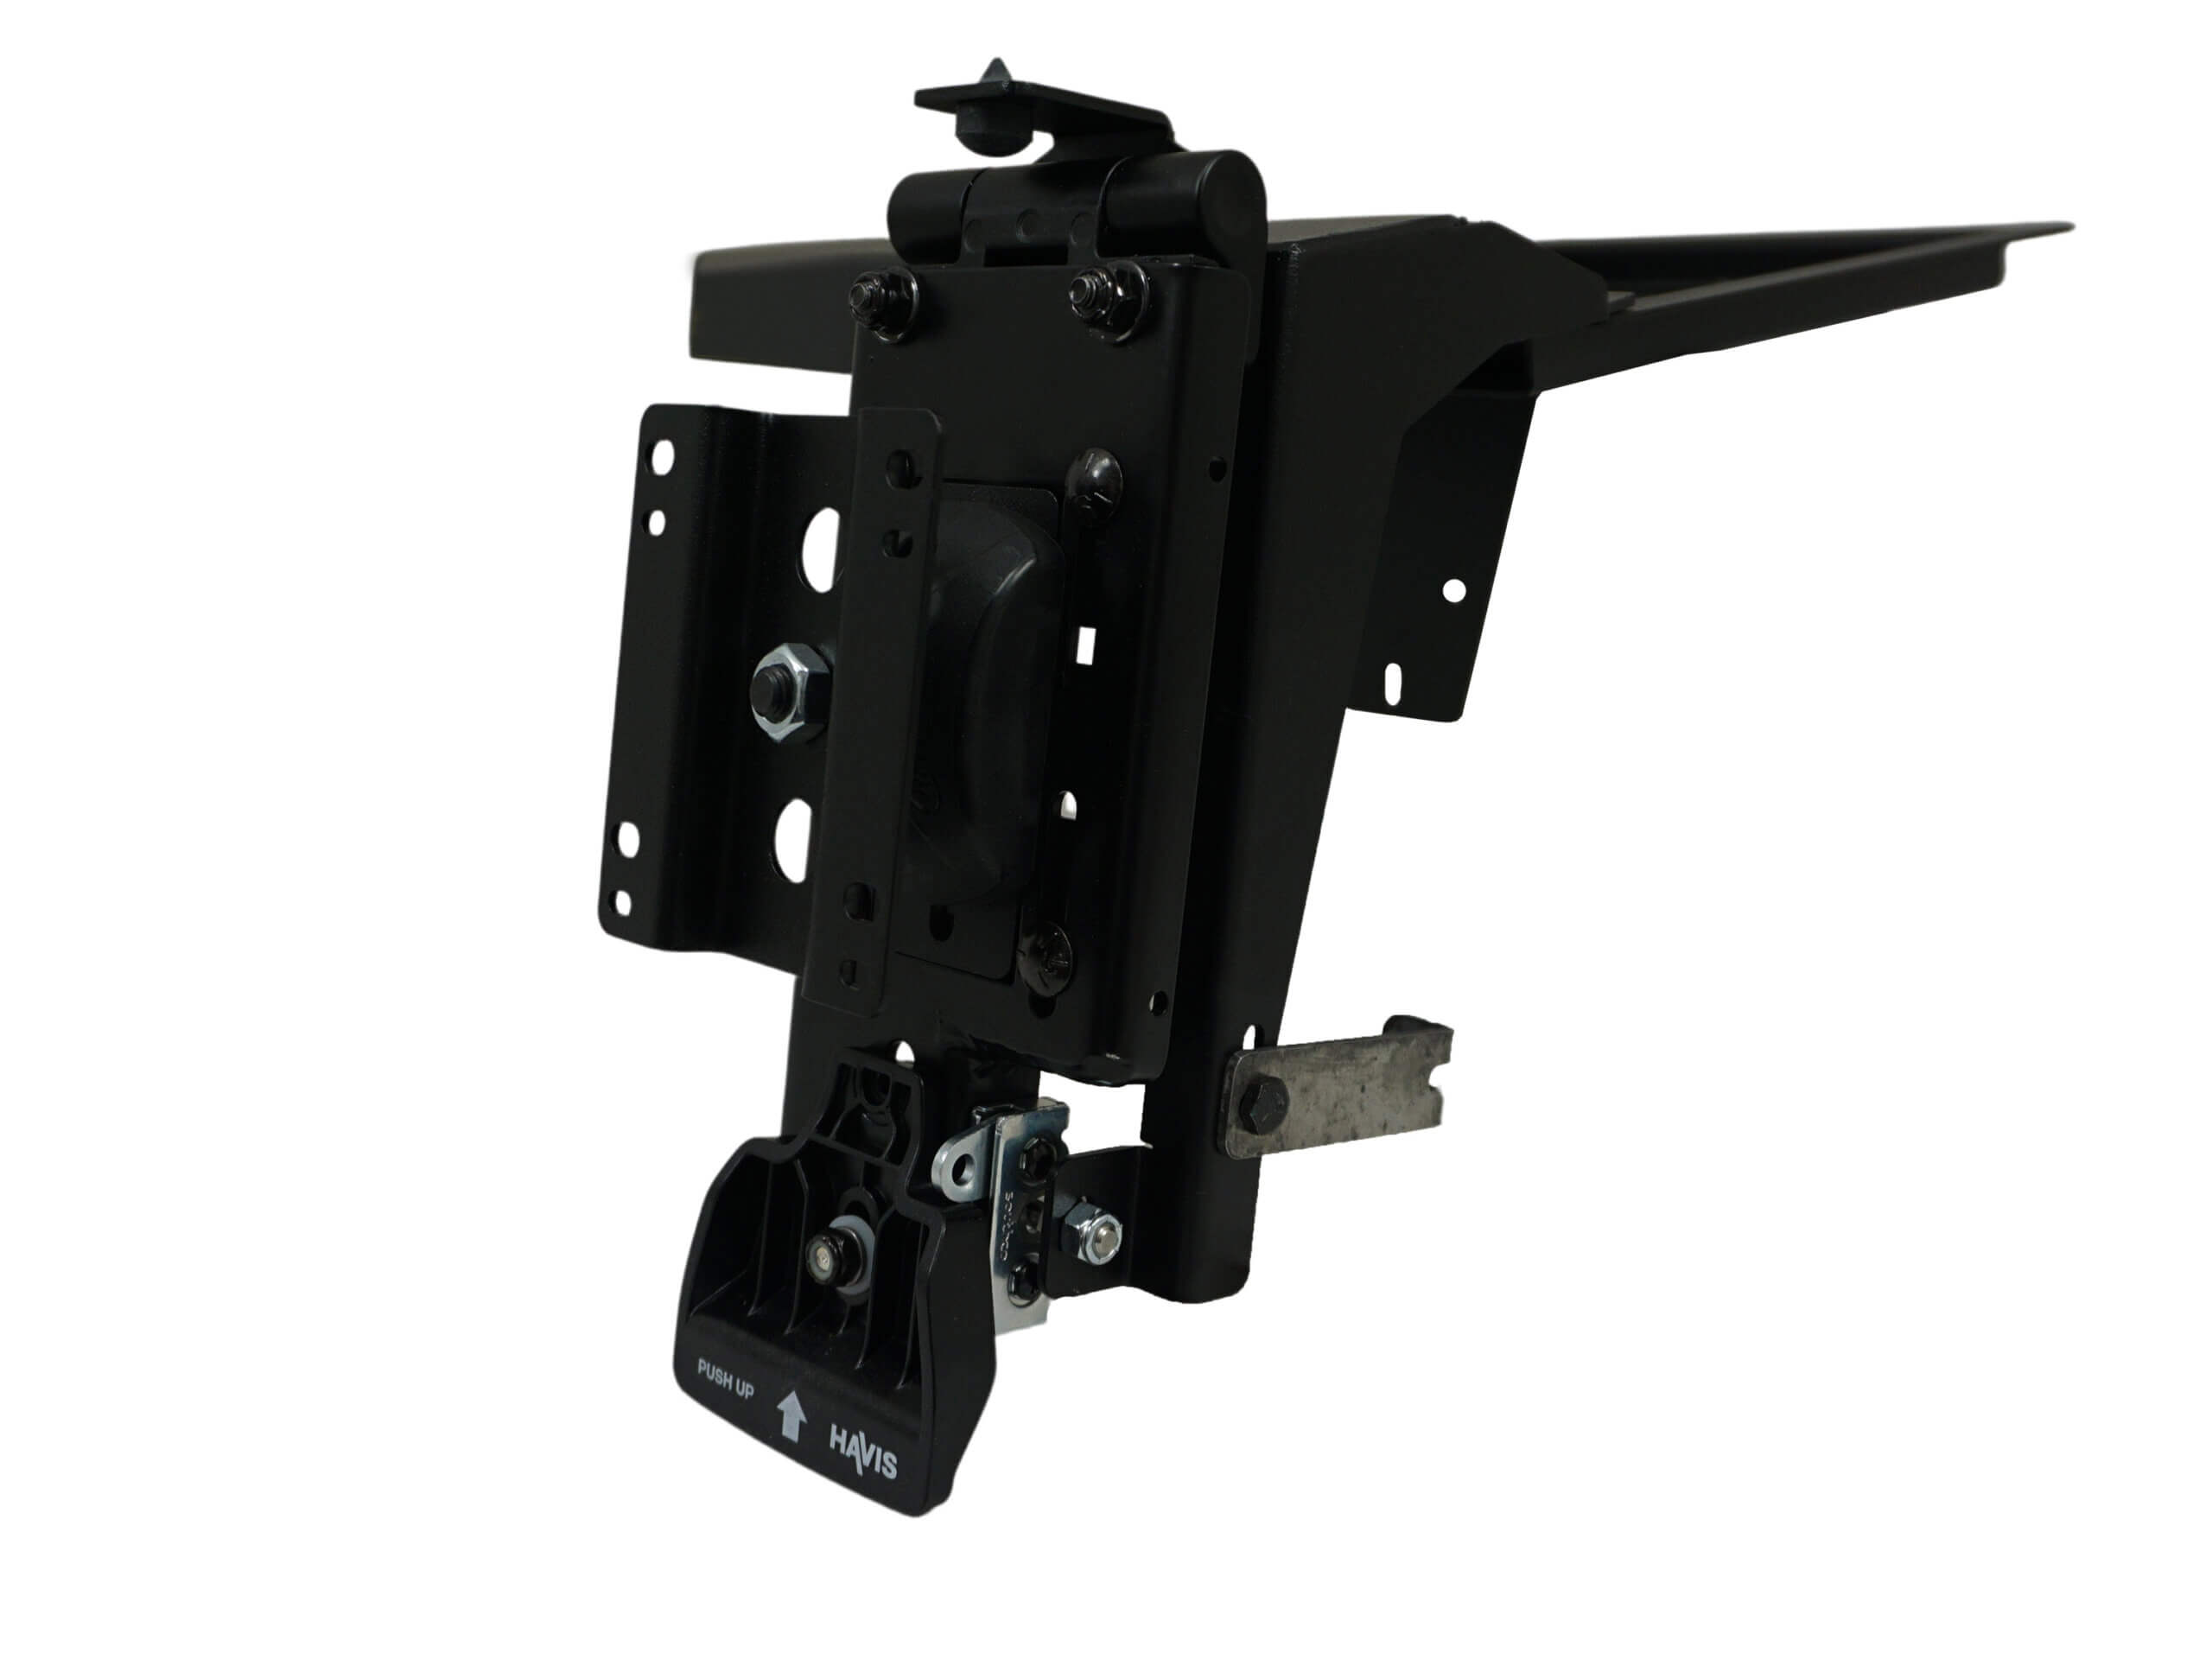 Heavy-Duty Dash Mount for 2015-2020 Ford F-150 Retail, Responder & SSV, 2017-2022 Ford F-250, 350, 450 Pickup, F-450 & 550 Cab Chassis, 2018-2021 Expedition Retail & SSV